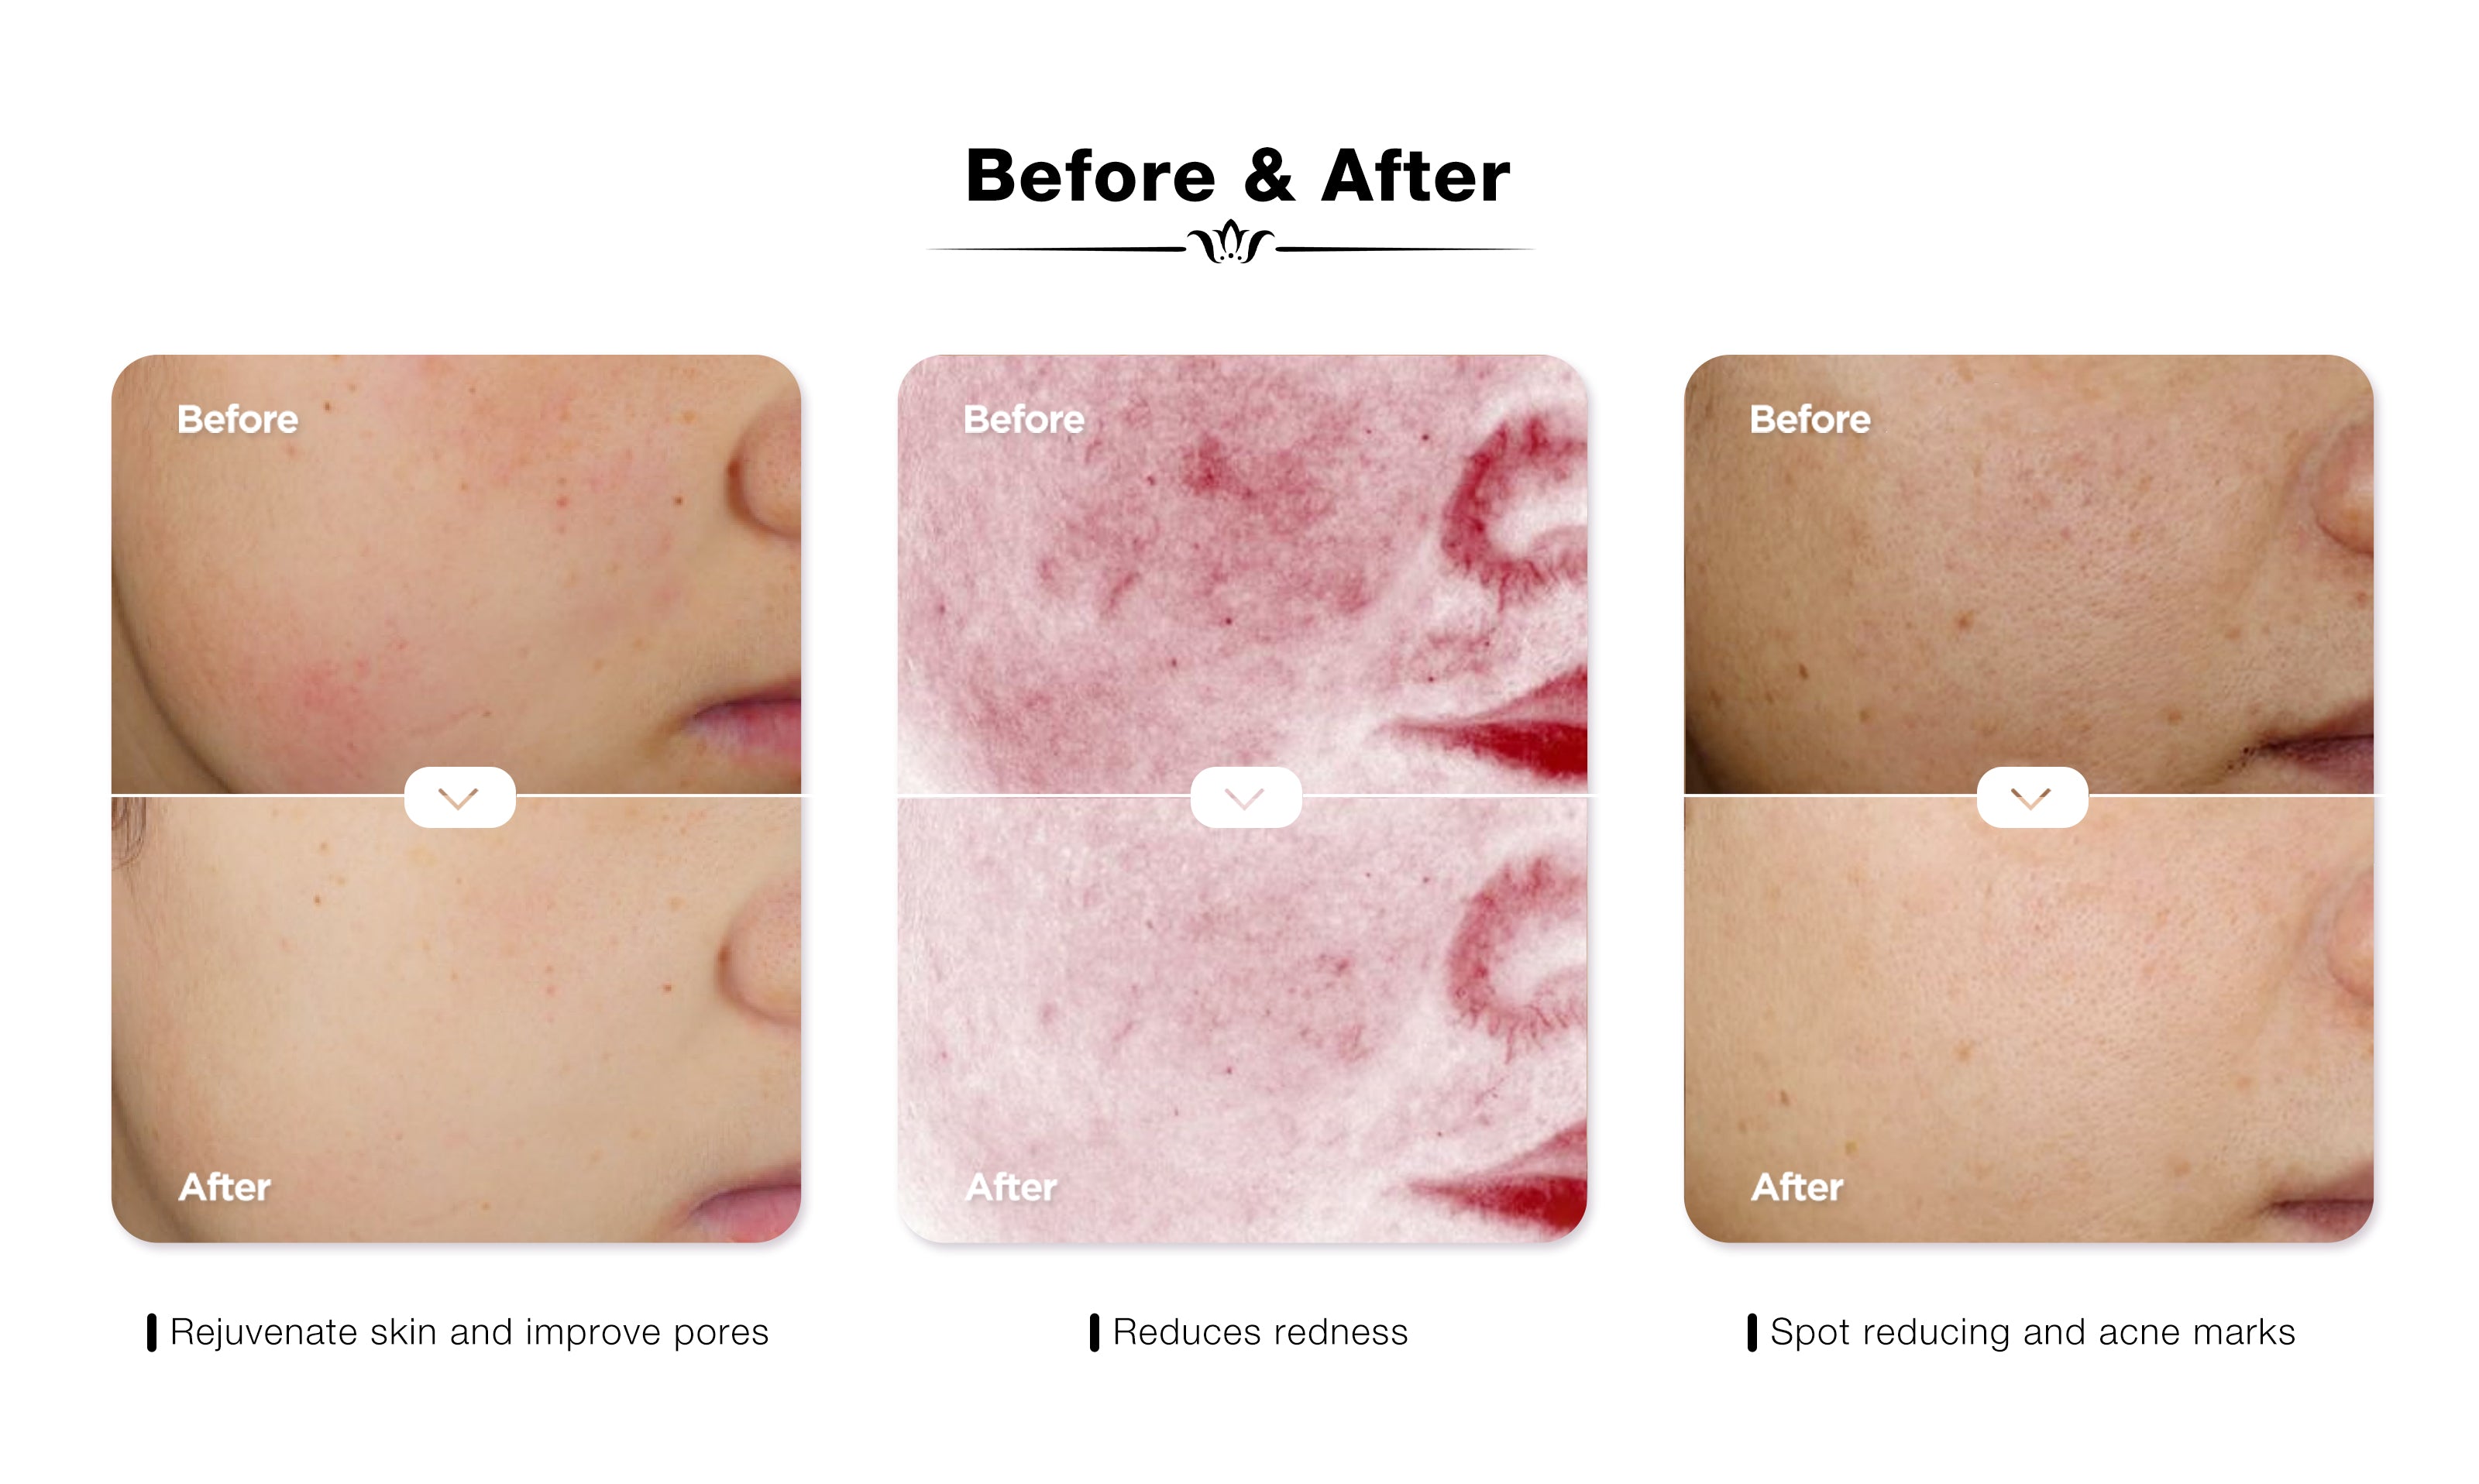 Before and after comparison using JOVS Blacken PRO DPL Photofacial Skincare Device: skin rejuvenation and pore improvement, redness reduction, and spots and acne marks fading.